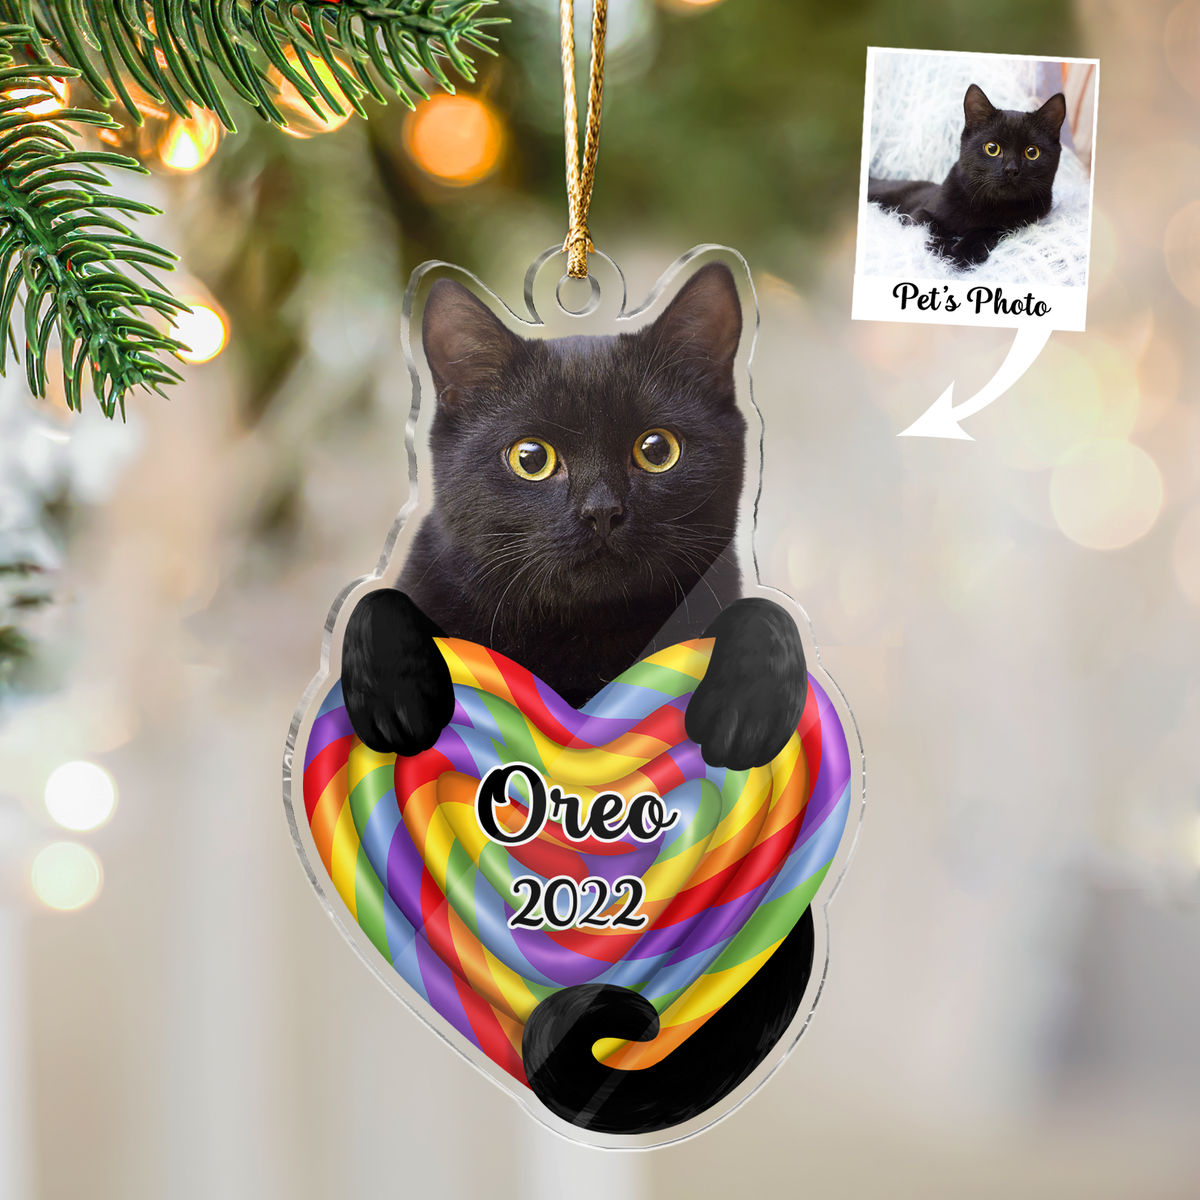 Photo Ornament - Customized Your Photo Ornament - Christmas Gifts For Pet Lover - Cat Hugging Heart - Custom Acrylic Ornament From Photo_1